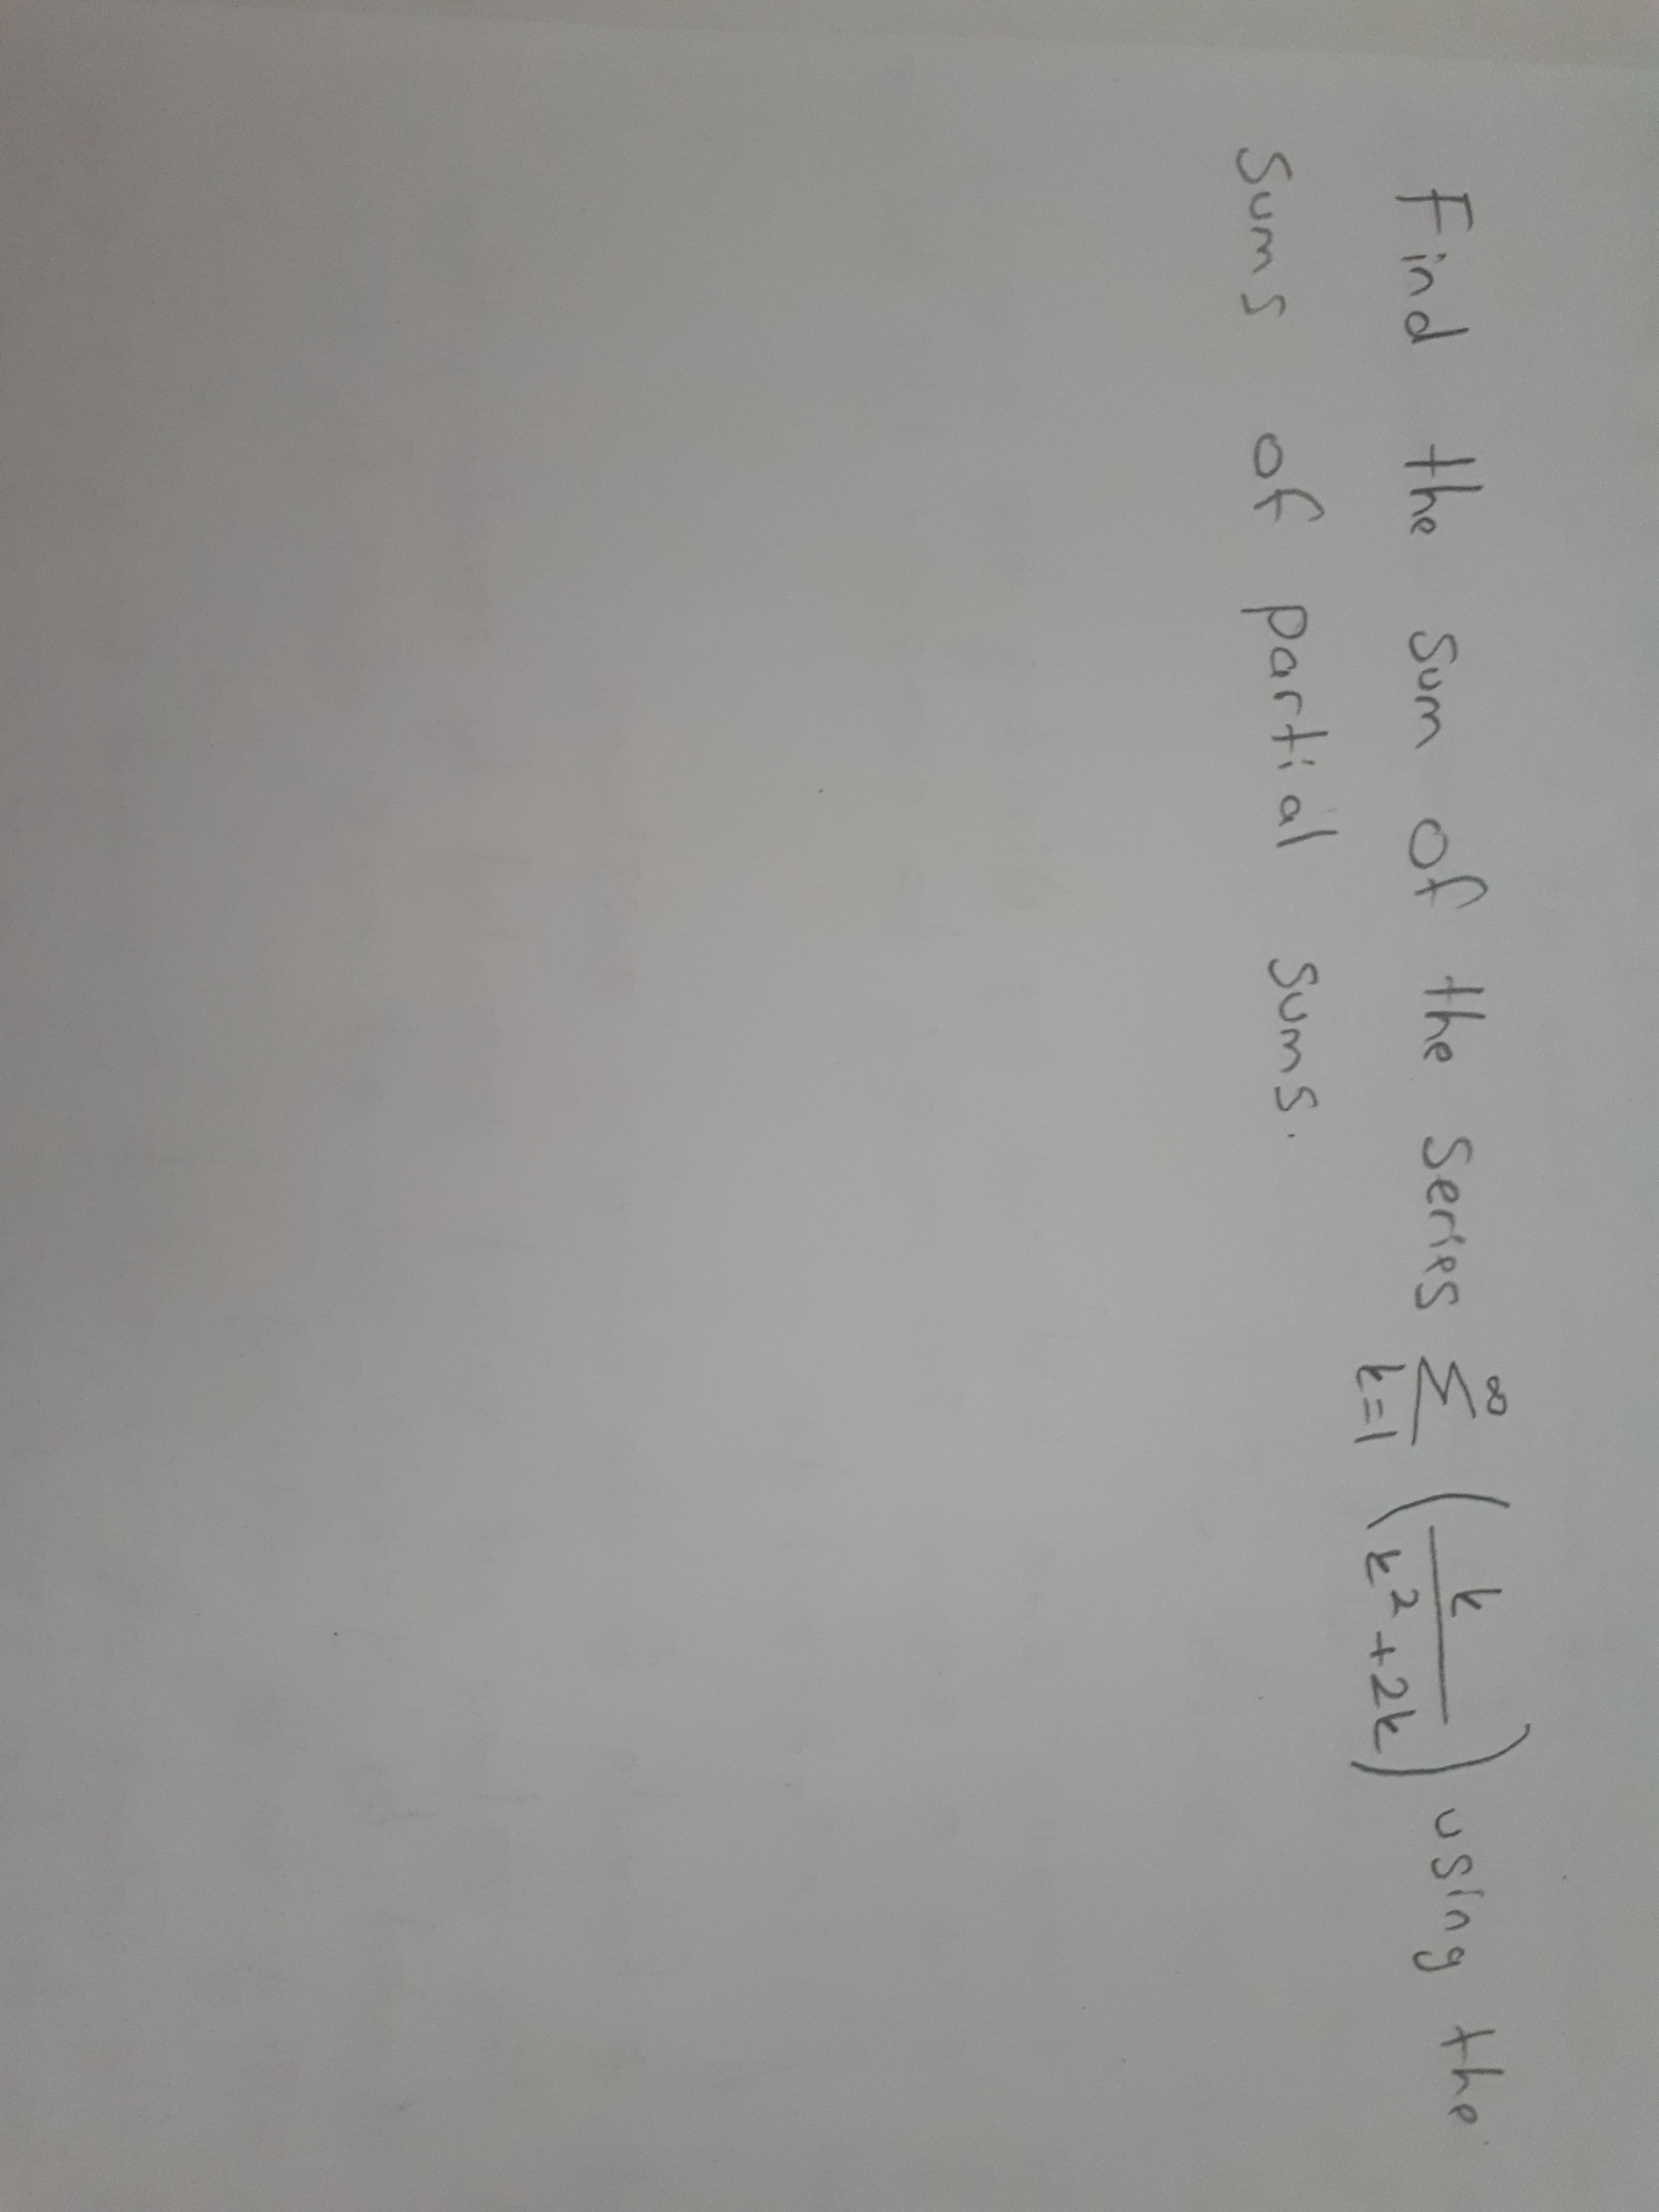 Find the Sum of the Series E
ヒ=1
using the
2+2k,
Sum S
of partial sums
SumS.
